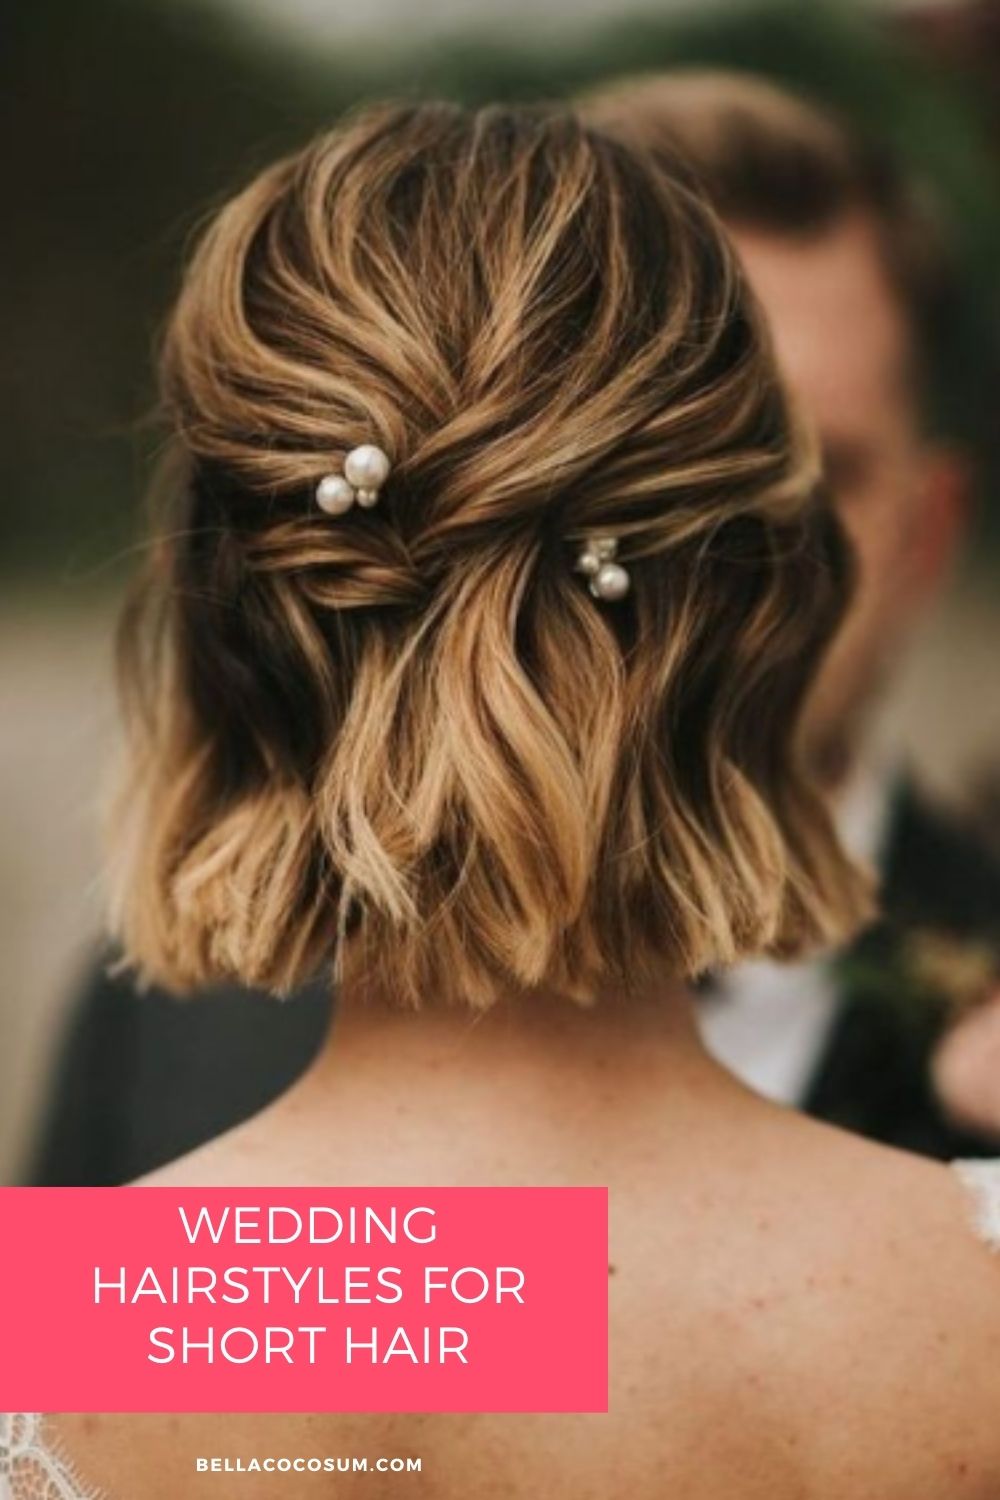 What is wedding hairstyles for short hair?